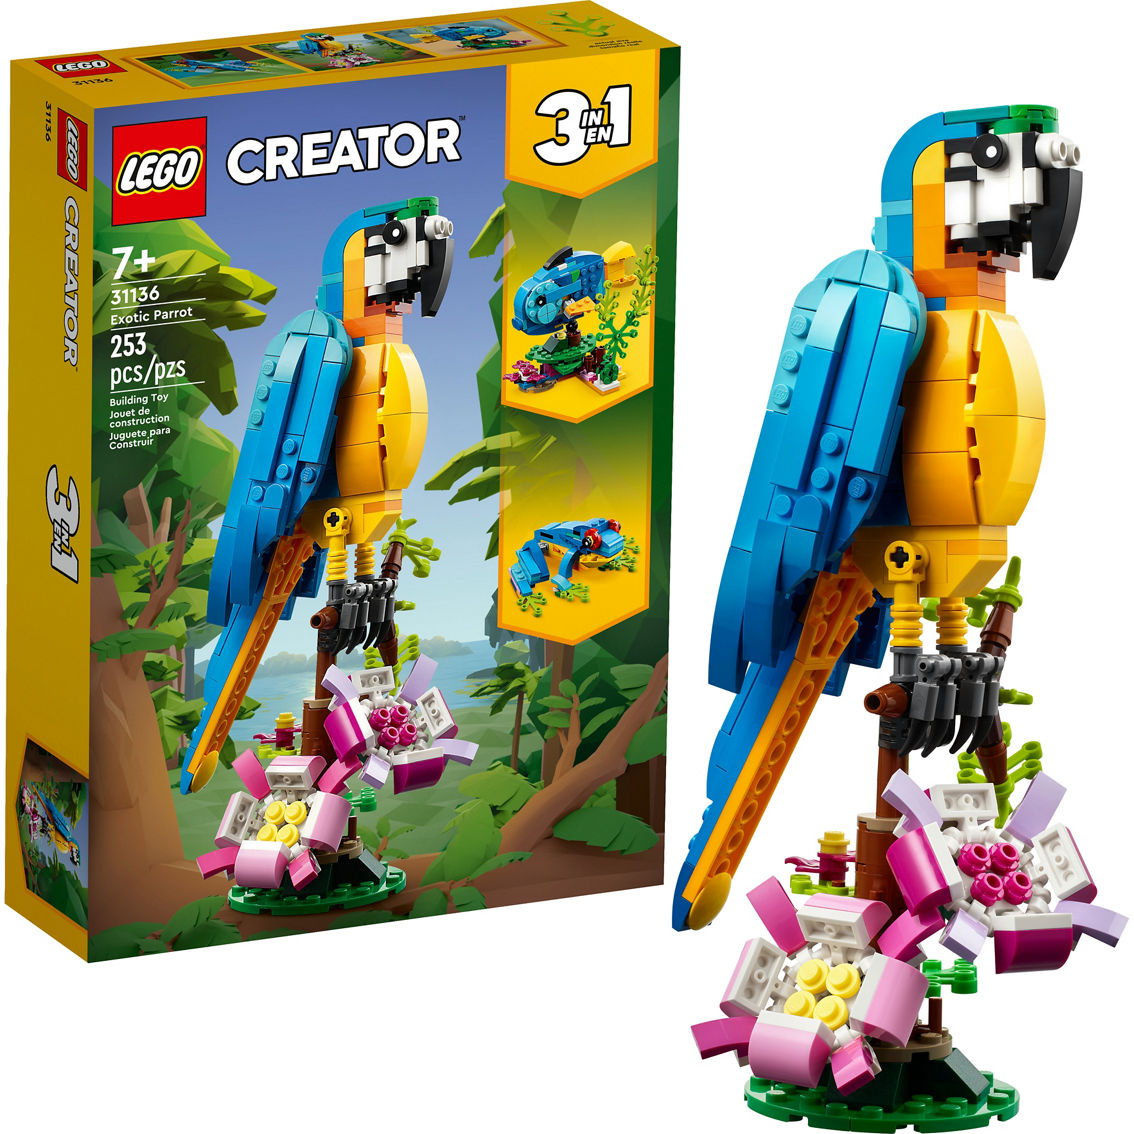 LEGO Creator Exotic Parrot Toy 31136 - Image 3 of 10